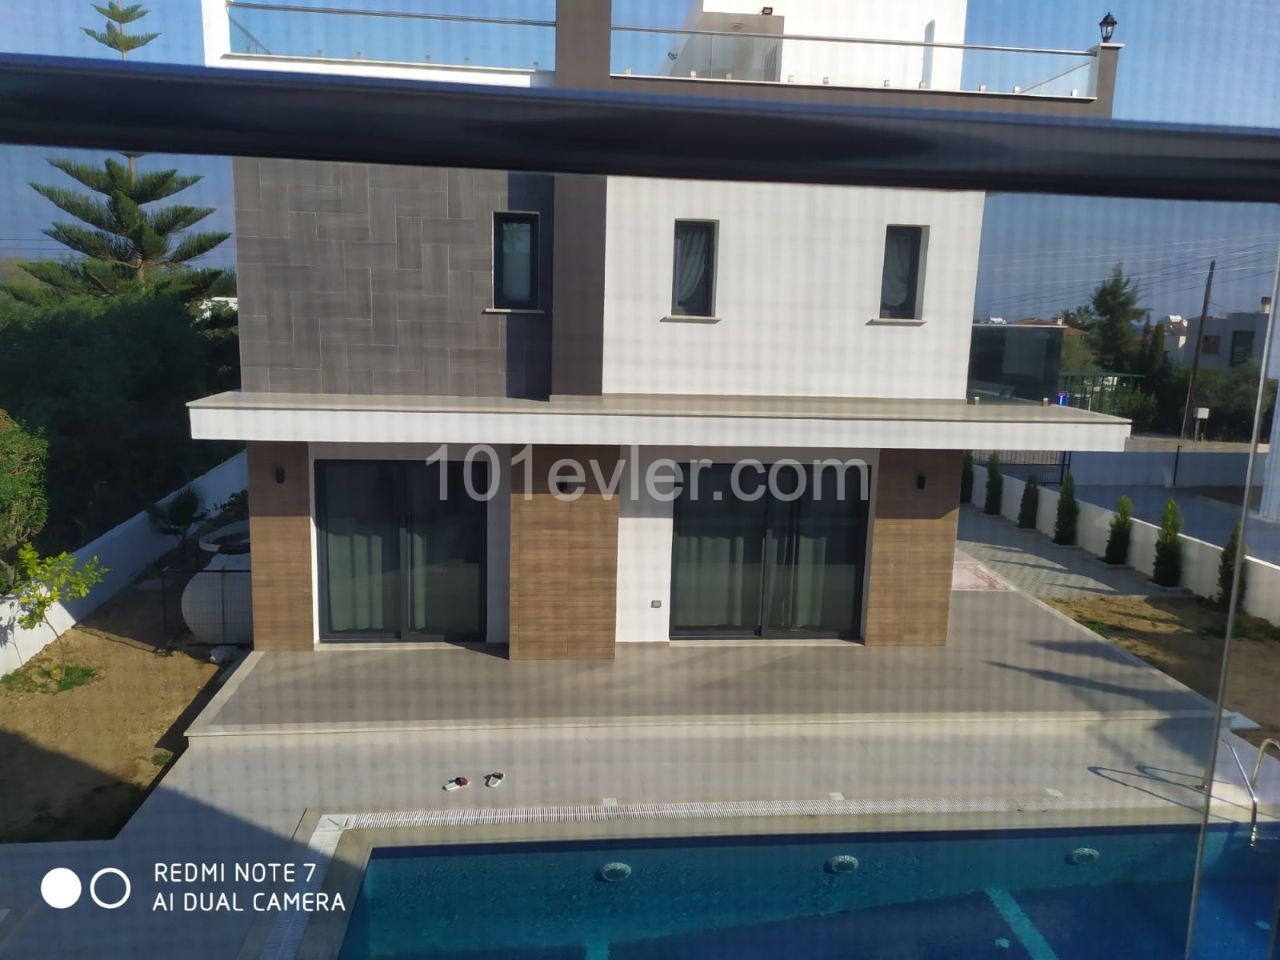 ULTRA LUXURIOUS MODERN VILLA FULLY FURNISHED, COME GET YOUR SPECIALLY MADE LUGGAGE, 2 MINUTES TO THE SEA, FULL VIEW. ** 